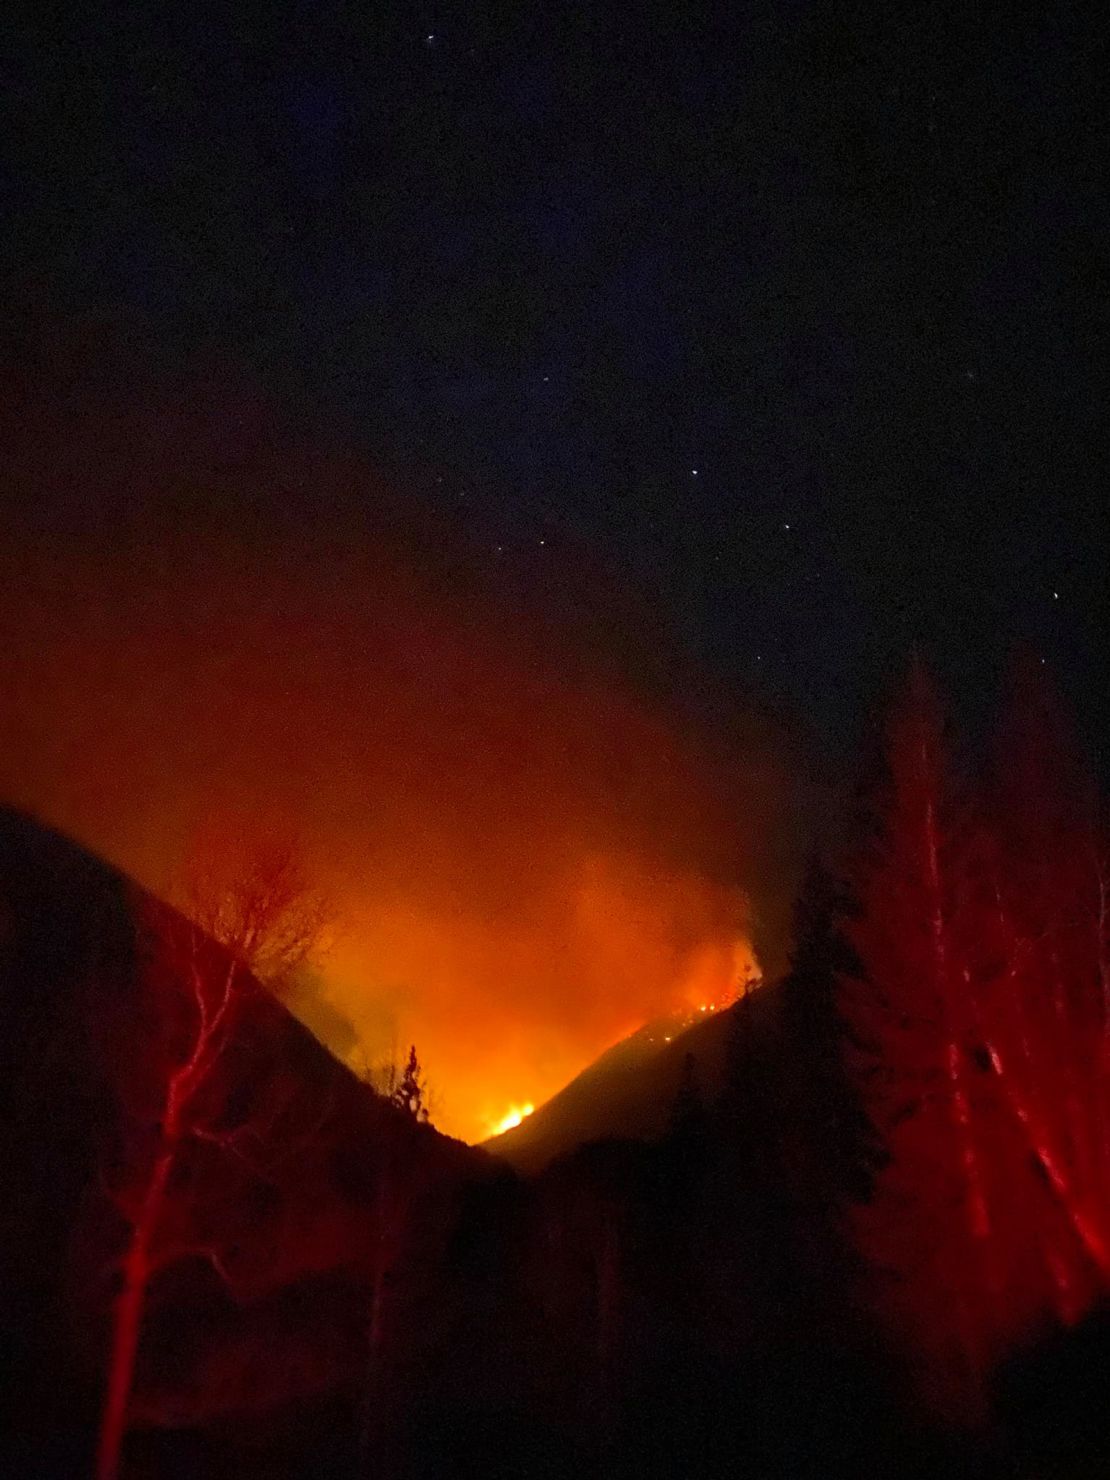 Twenty-three hikers were rescued from a trailhead near the Ice Fire.